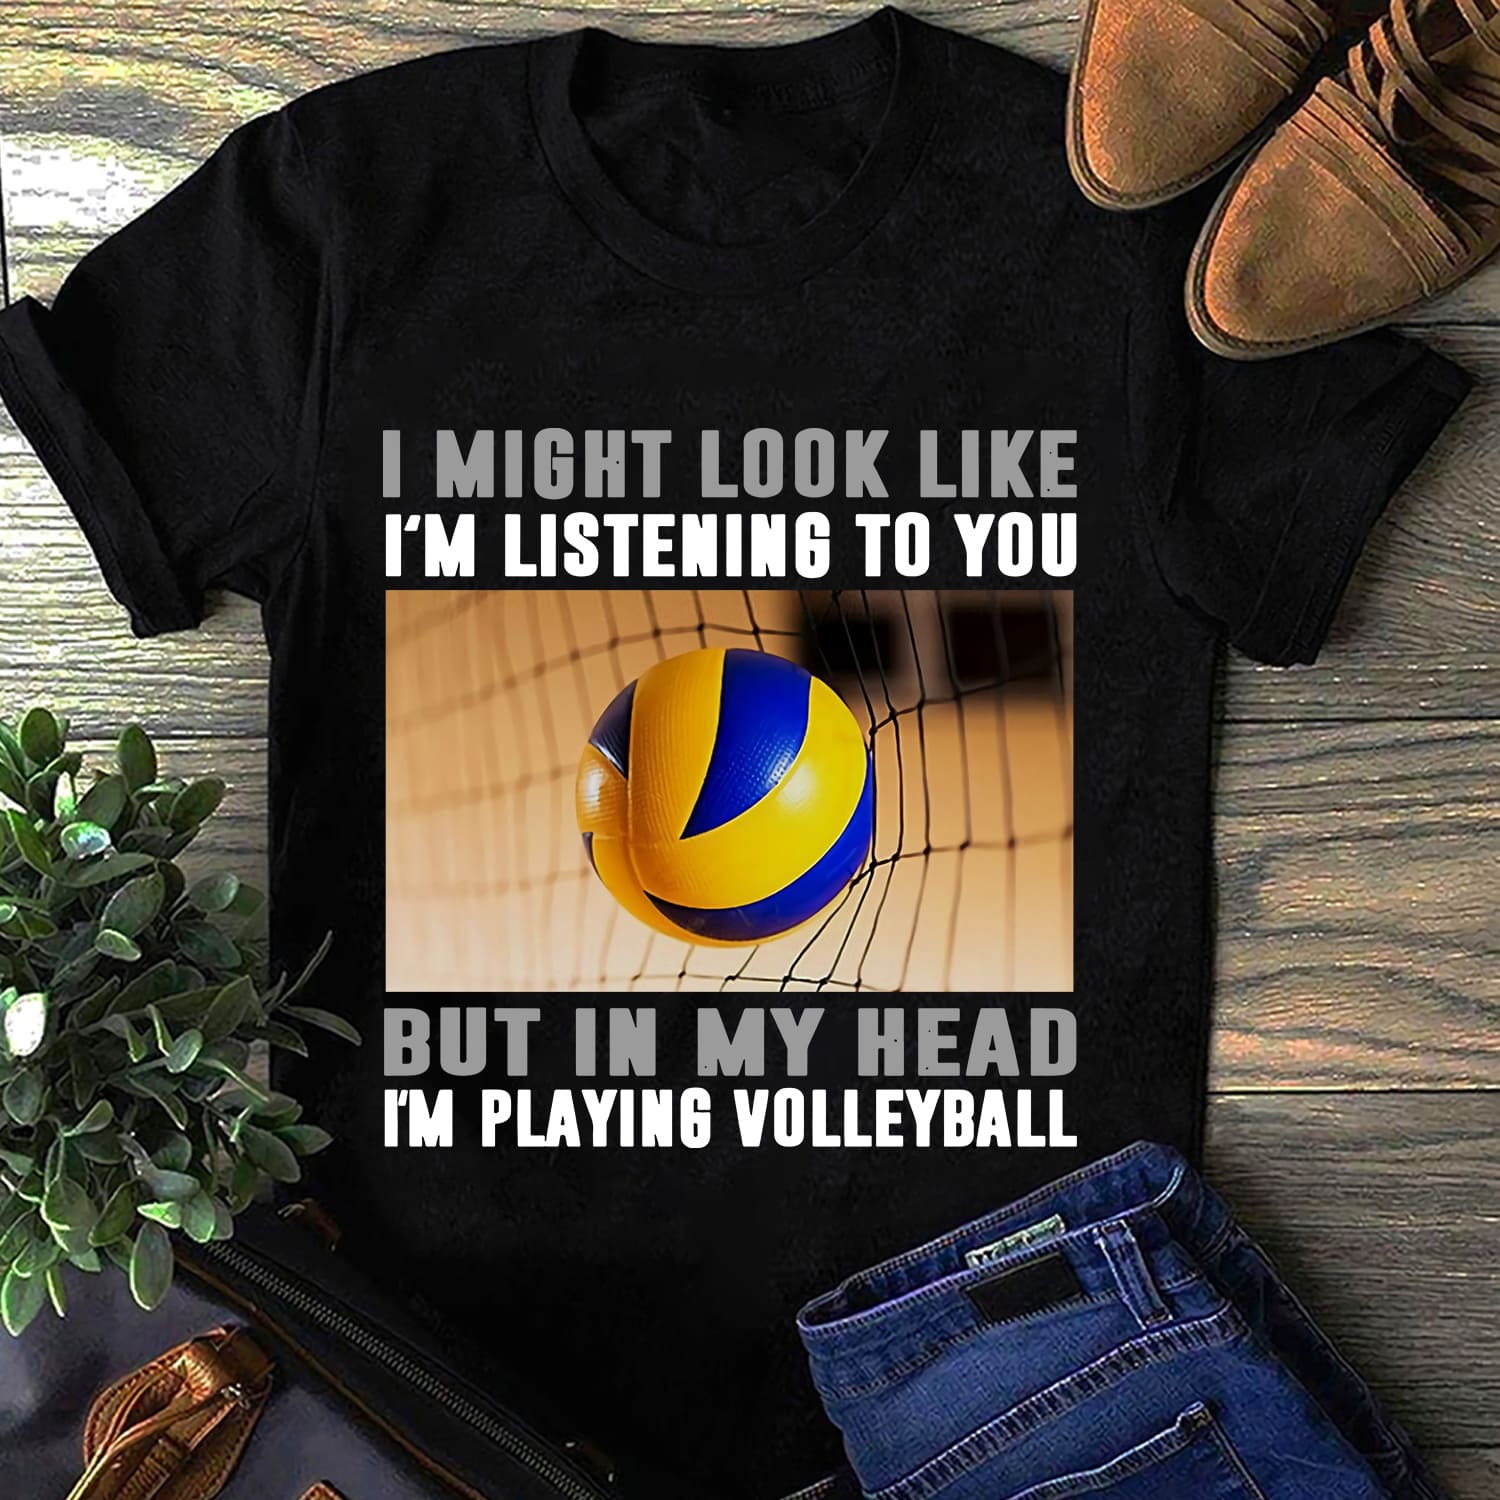 I might look like I'm listening to you but in my head I'm playing volleyball - T-shirt for volleyball player